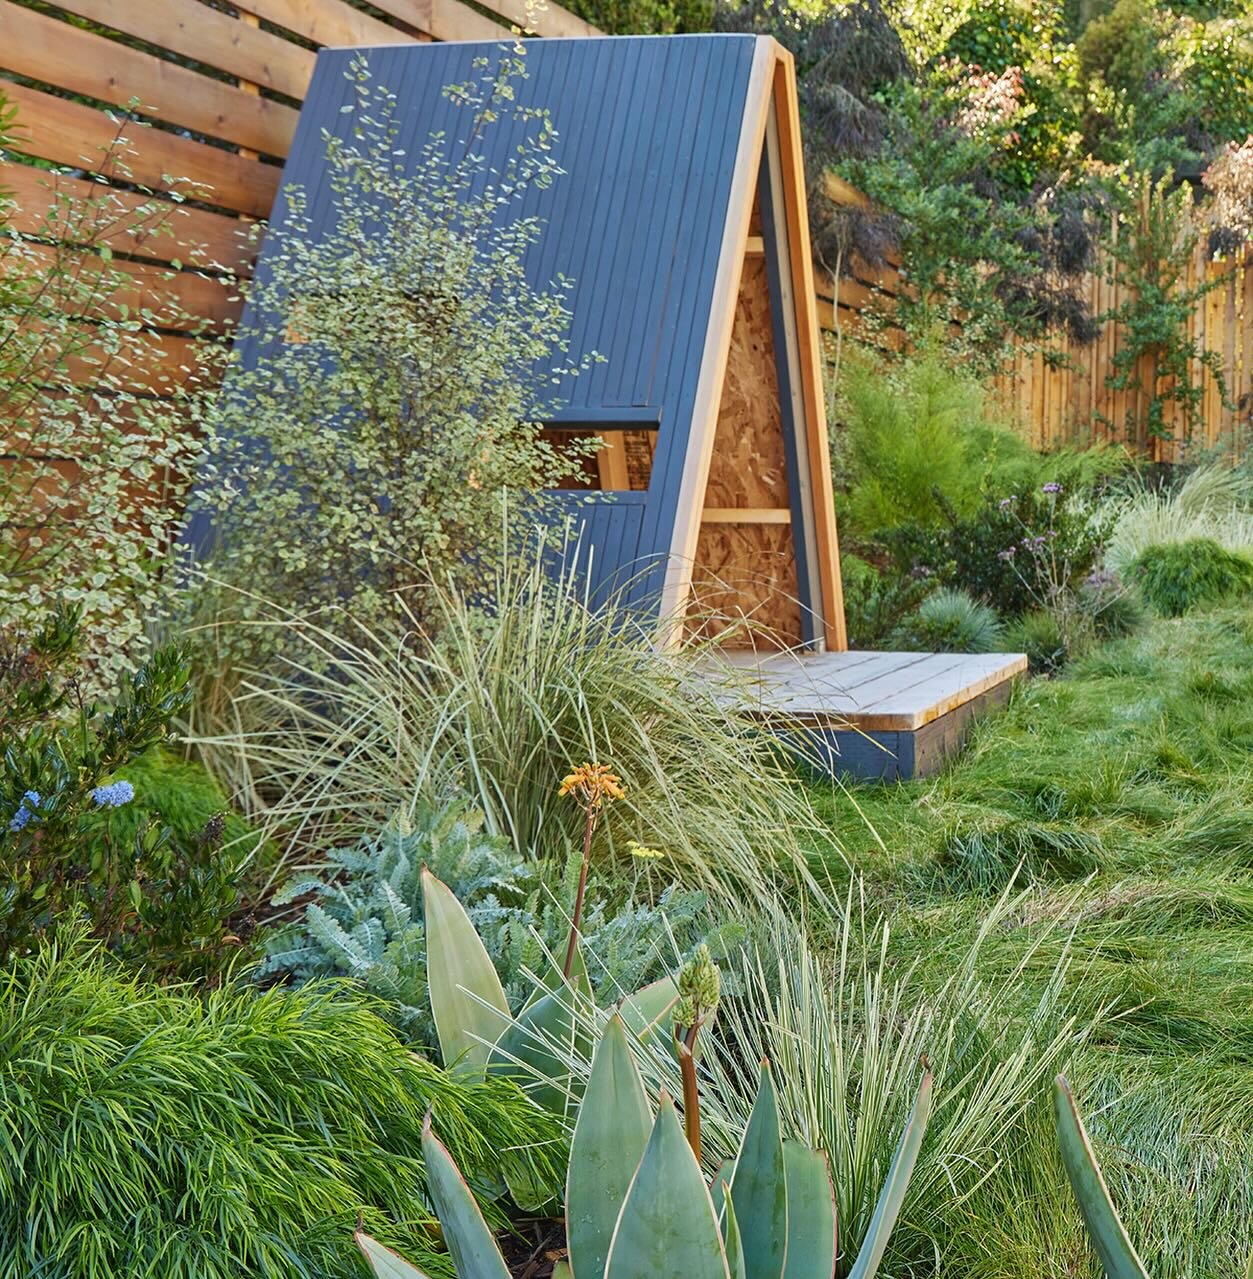 It&rsquo;s going to be a great warm weekend for gardening! Want some inspiration for your spring garden projects? Check out this beauty in SF, designed by Dani Coulter and Johnny Keegan of @collecting_flowers and photographed by @caitlinatkinson_phot